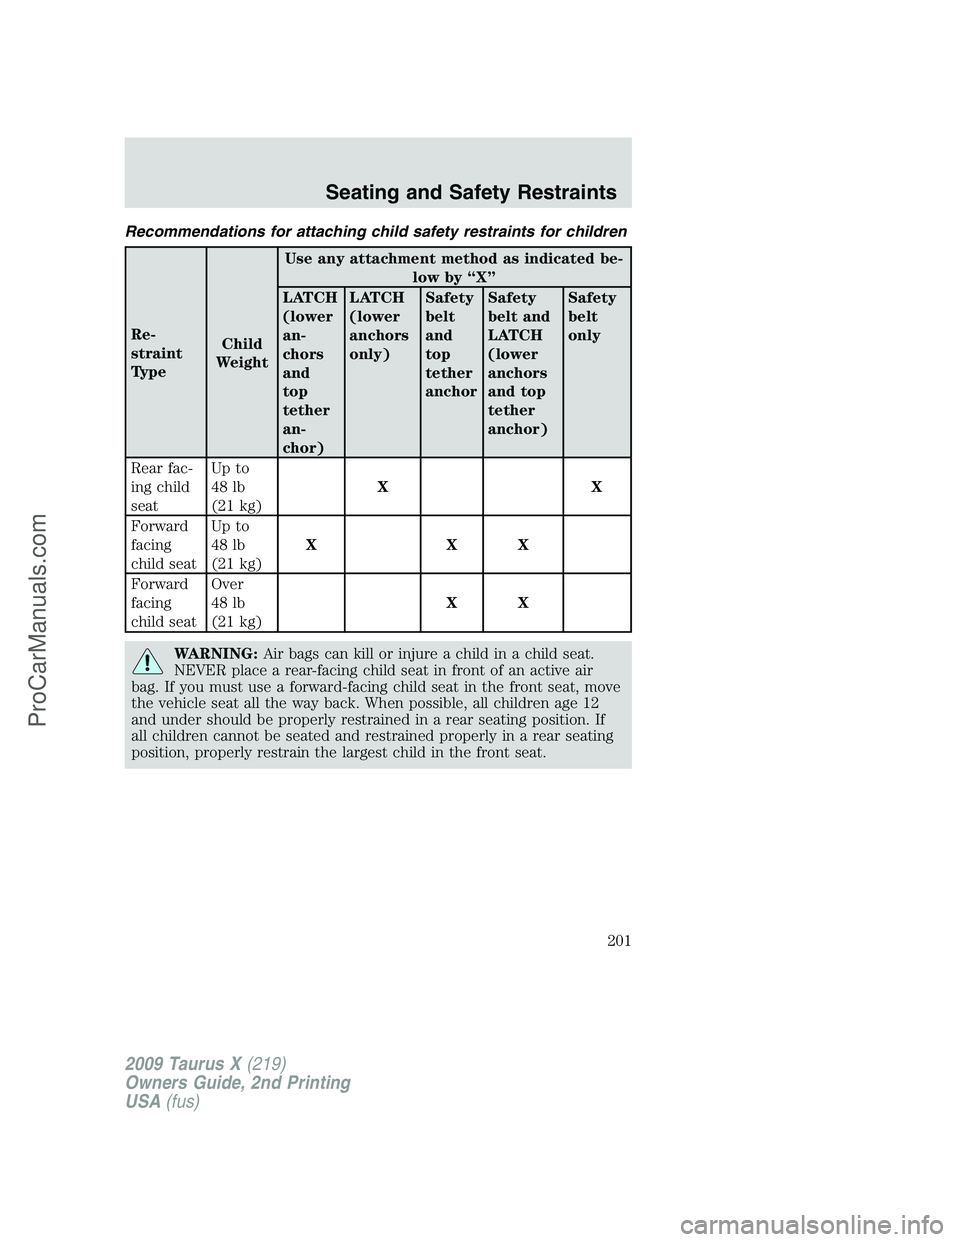 FORD FREESTYLE 2009  Owners Manual Recommendations for attaching child safety restraints for children
Re-
straint
TypeChild
WeightUse any attachment method as indicated be-
low by “X”
LATCH
(lower
an-
chors
and
top
tether
an-
chor)